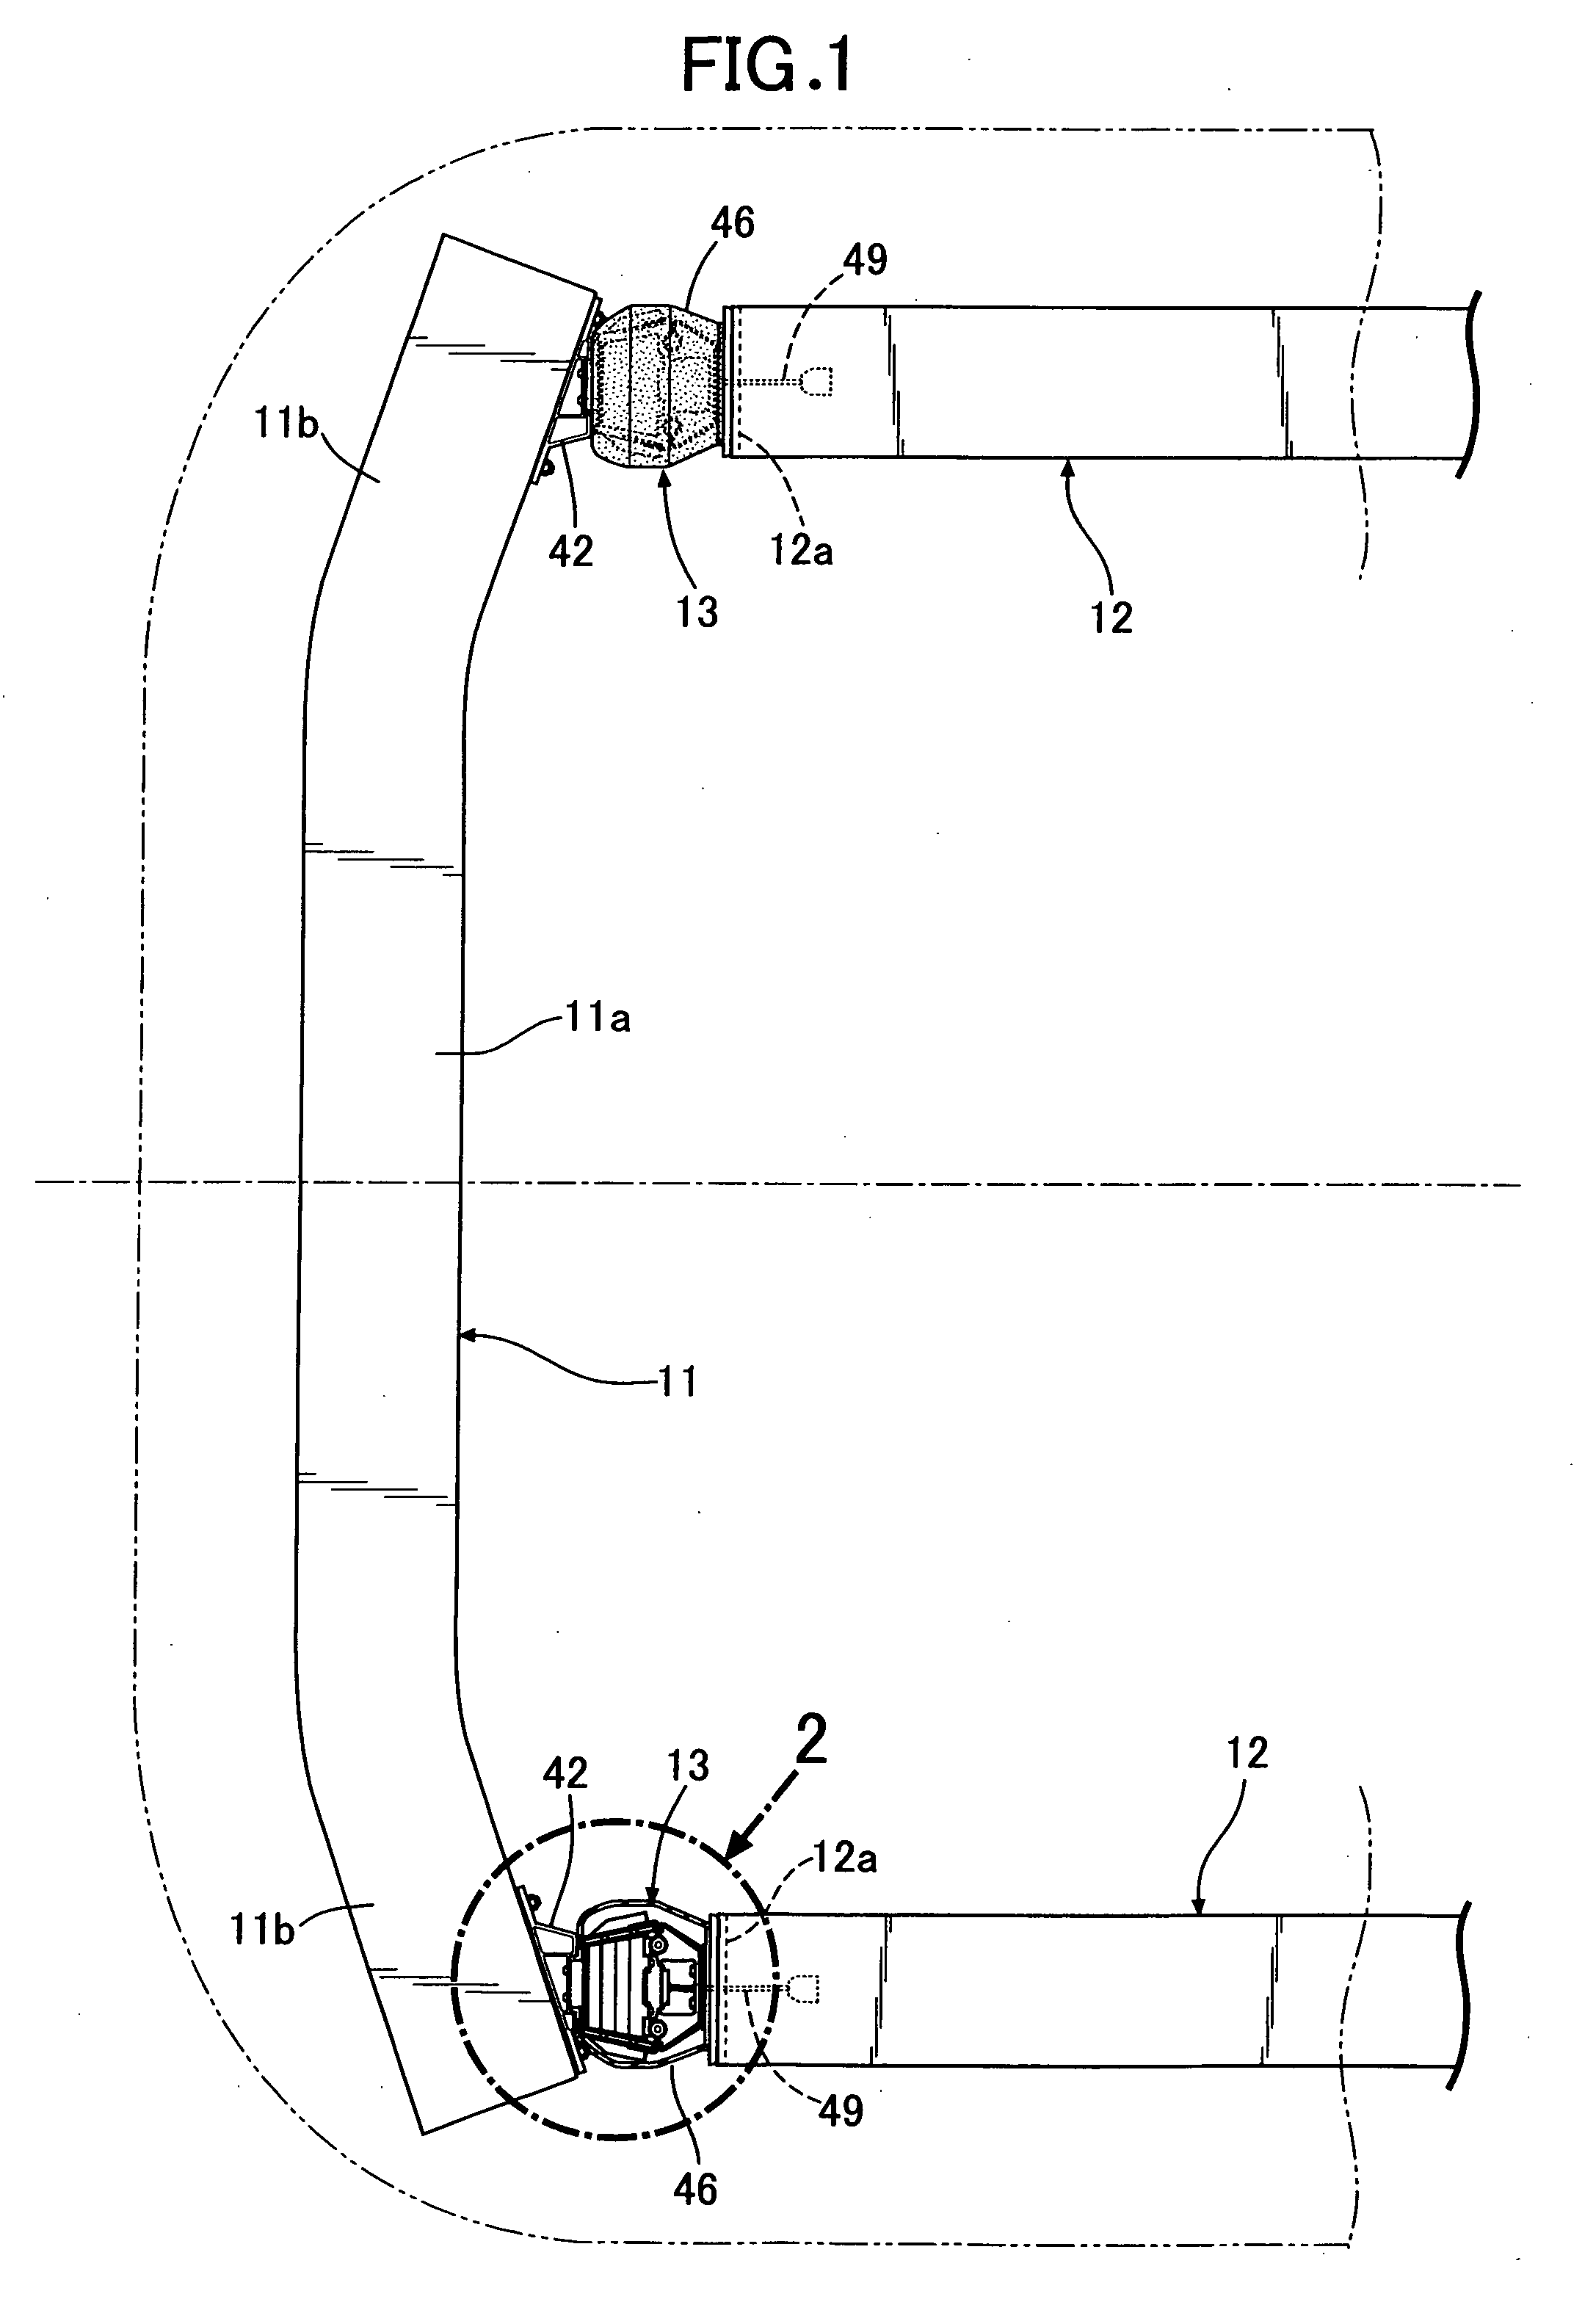 Crushable body strength adjusting device for a vehicle